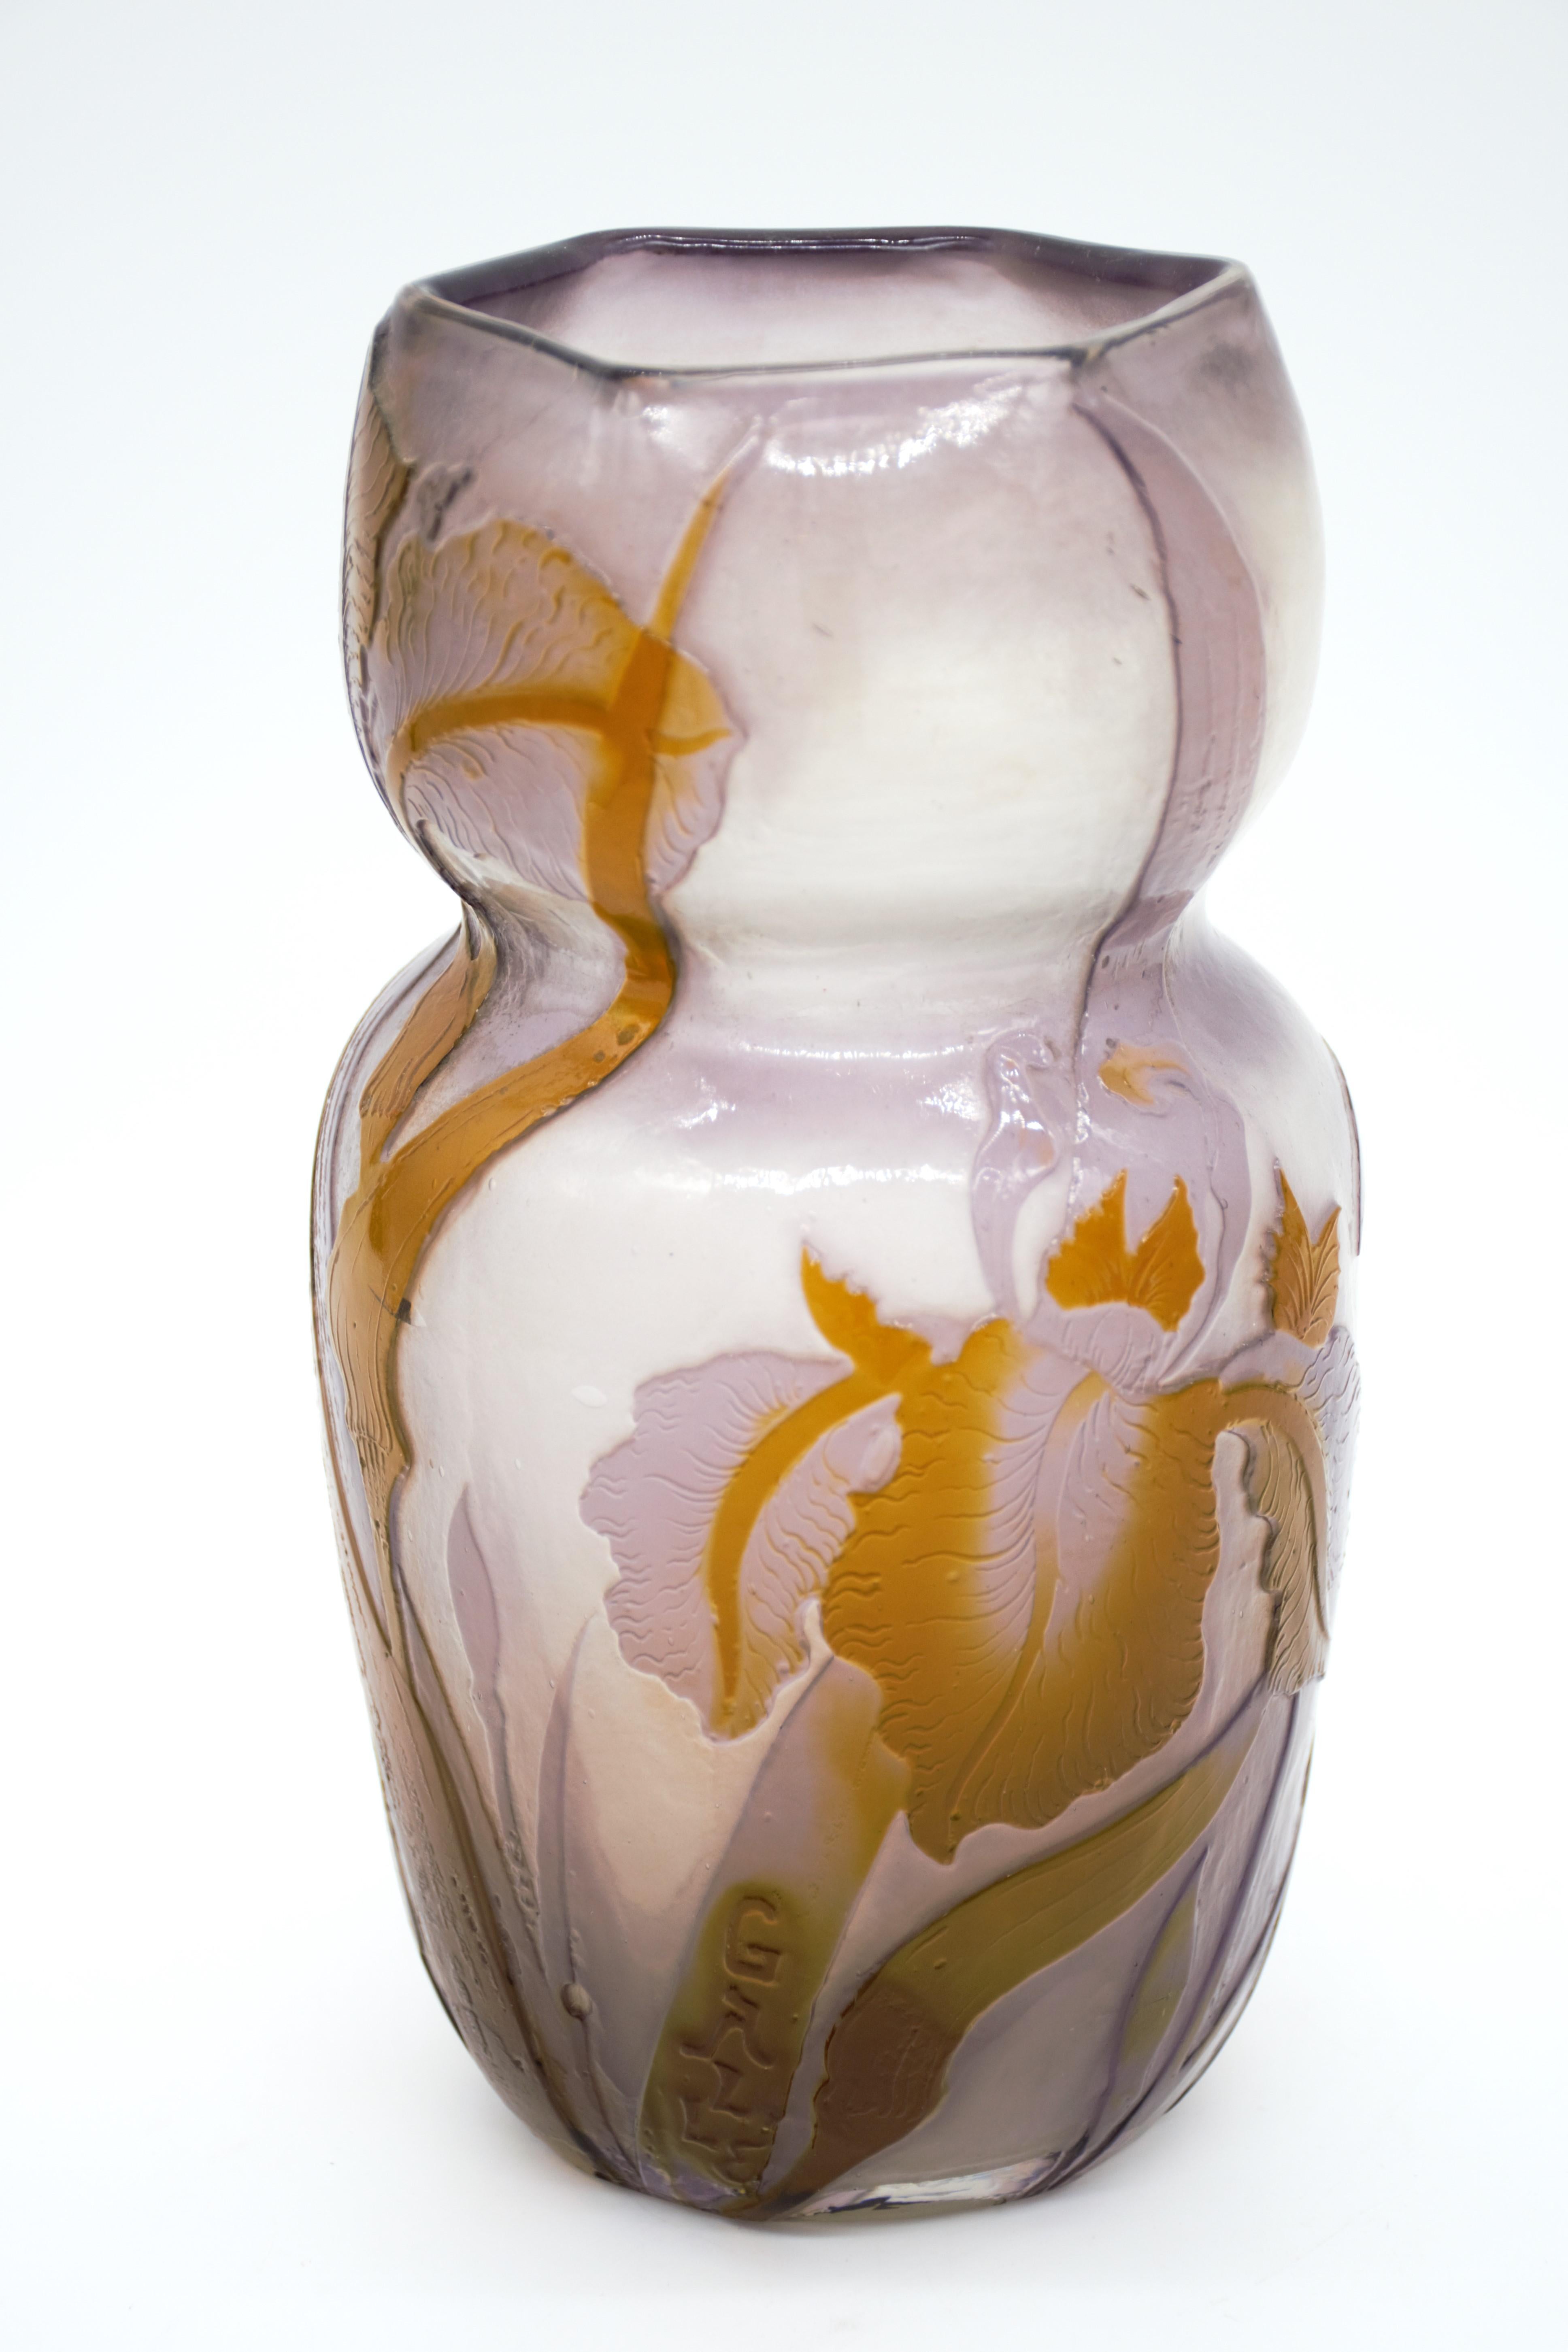 ÉMILE GALLÉ (1846-1904)
Rare and important 'Iris' Vase, circa 1900
Overlaid cameo and fire polished glass, well documented in books and exhibitions
Signed in cameo Gallé.

Measurements :
Height : 9 in. (22.9 cm)
Diameter :  5 in. (12.7